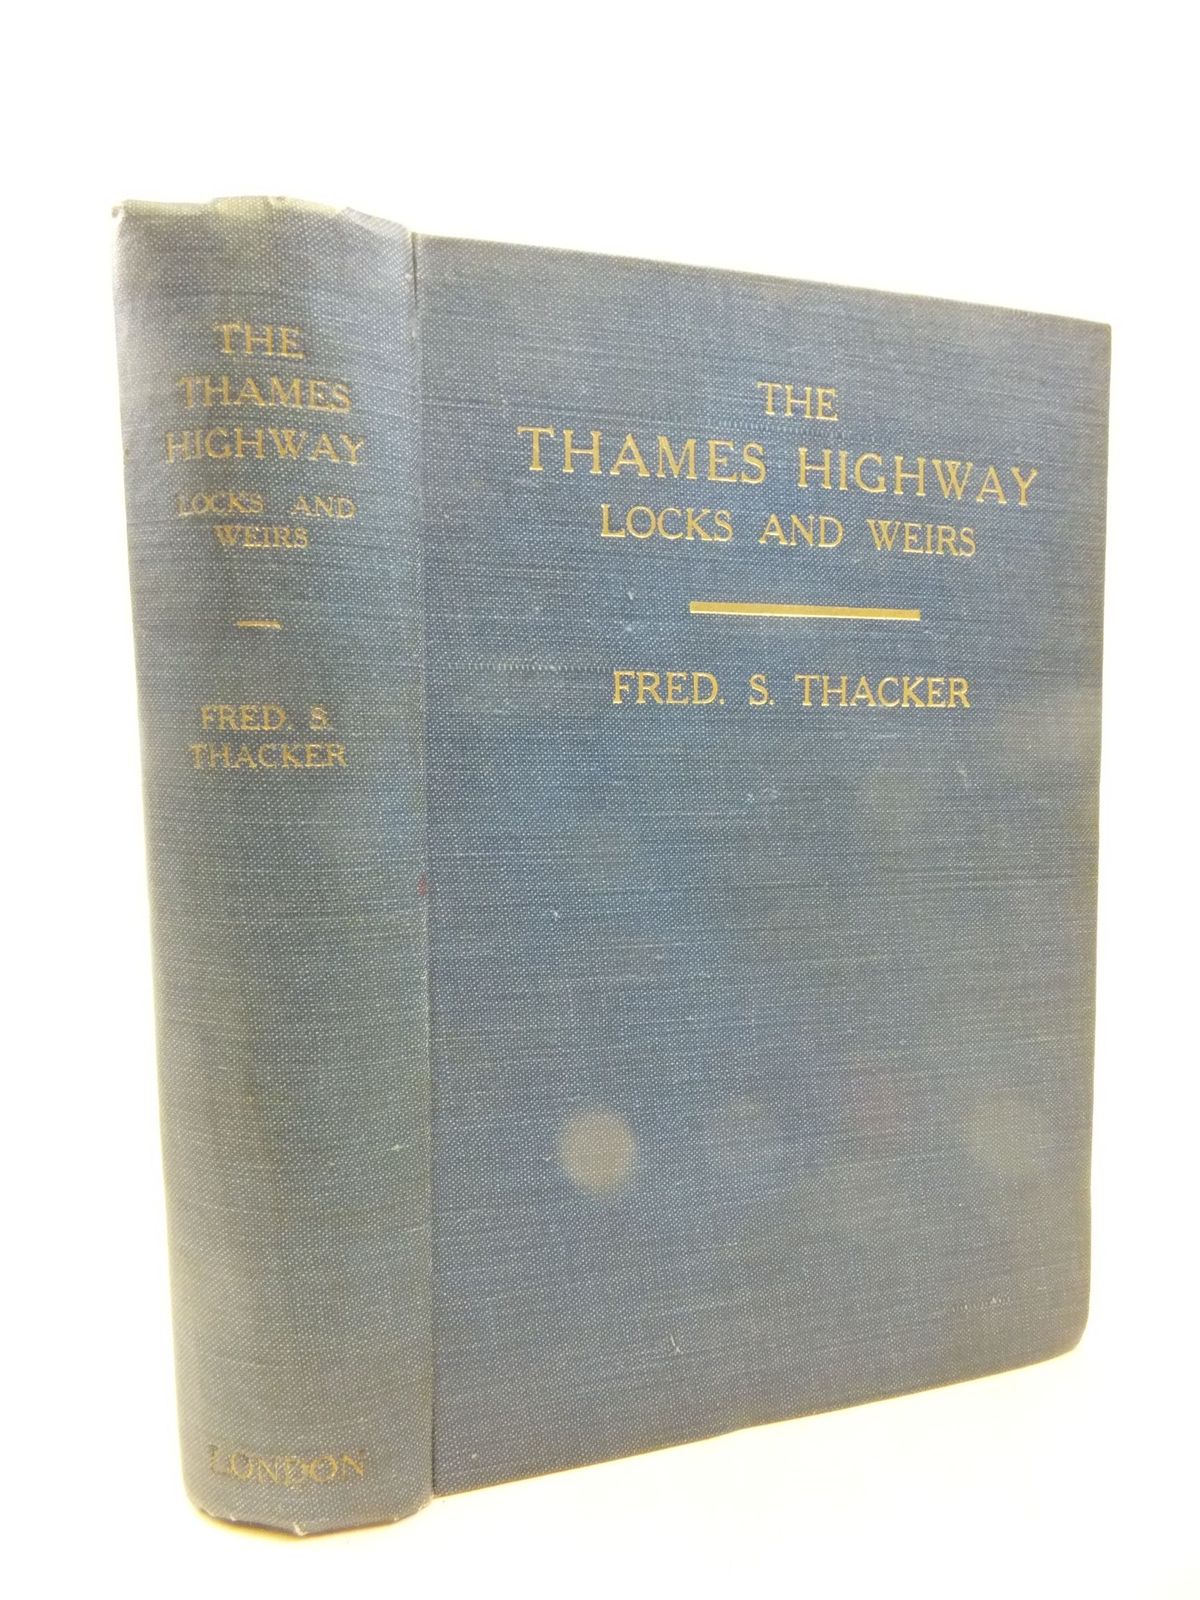 Photo of THE THAMES HIGHWAY A HISTORY OF THE LOCKS AND WEIRS written by Thacker, Fred S. published by Fred S. Thacker (STOCK CODE: 2114739)  for sale by Stella & Rose's Books